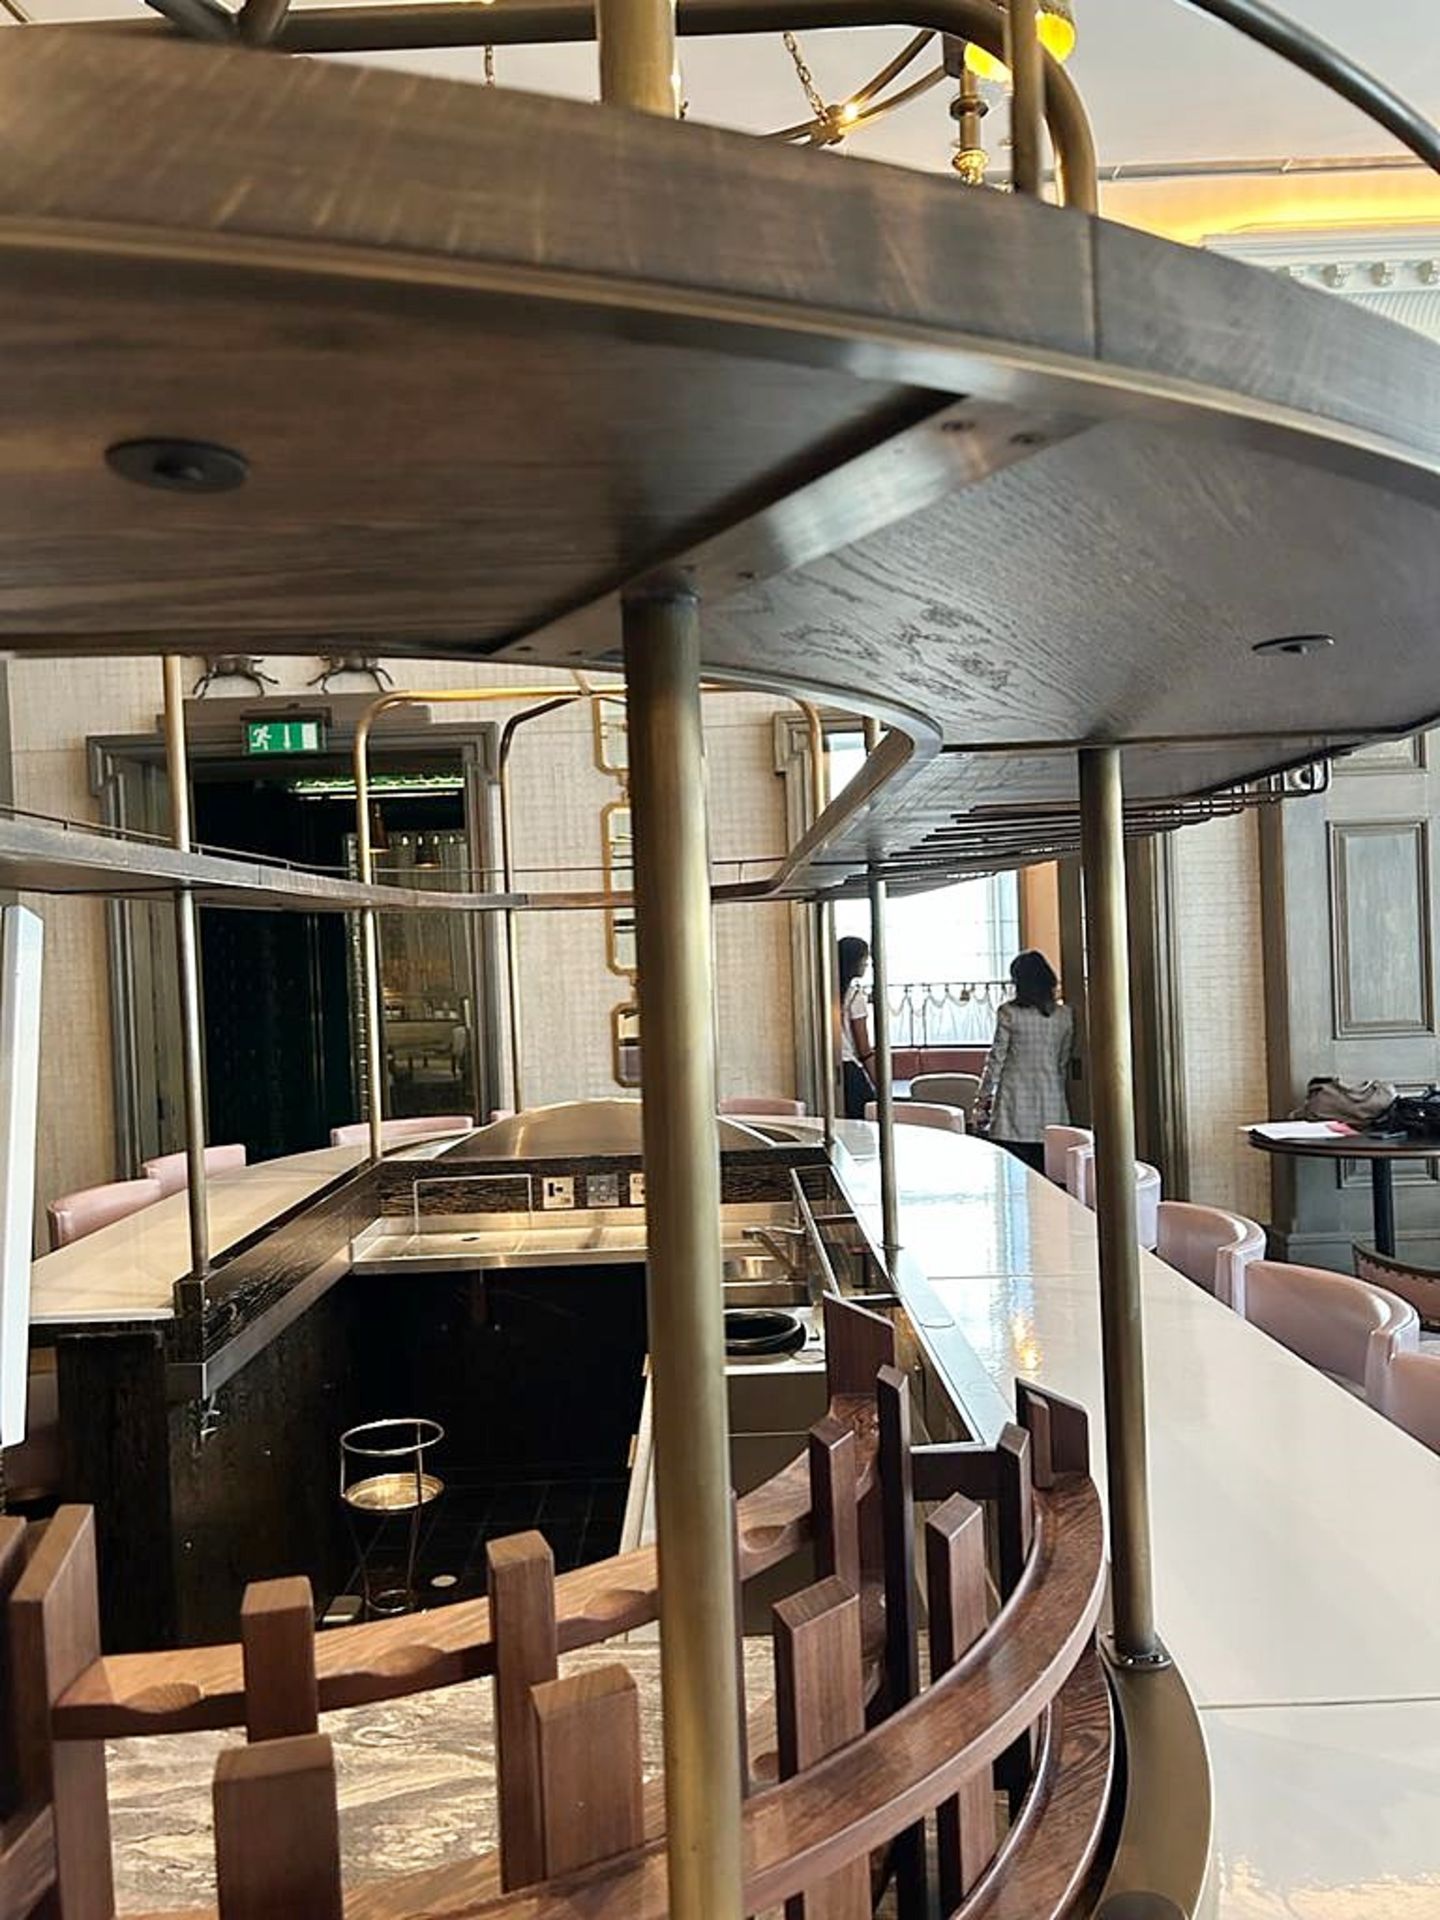 1 x Luxury Curved Restaurant 5.5-Metre Centrepiece Bar, Clad in Timber & Leather with 18 x Stools - Image 47 of 72